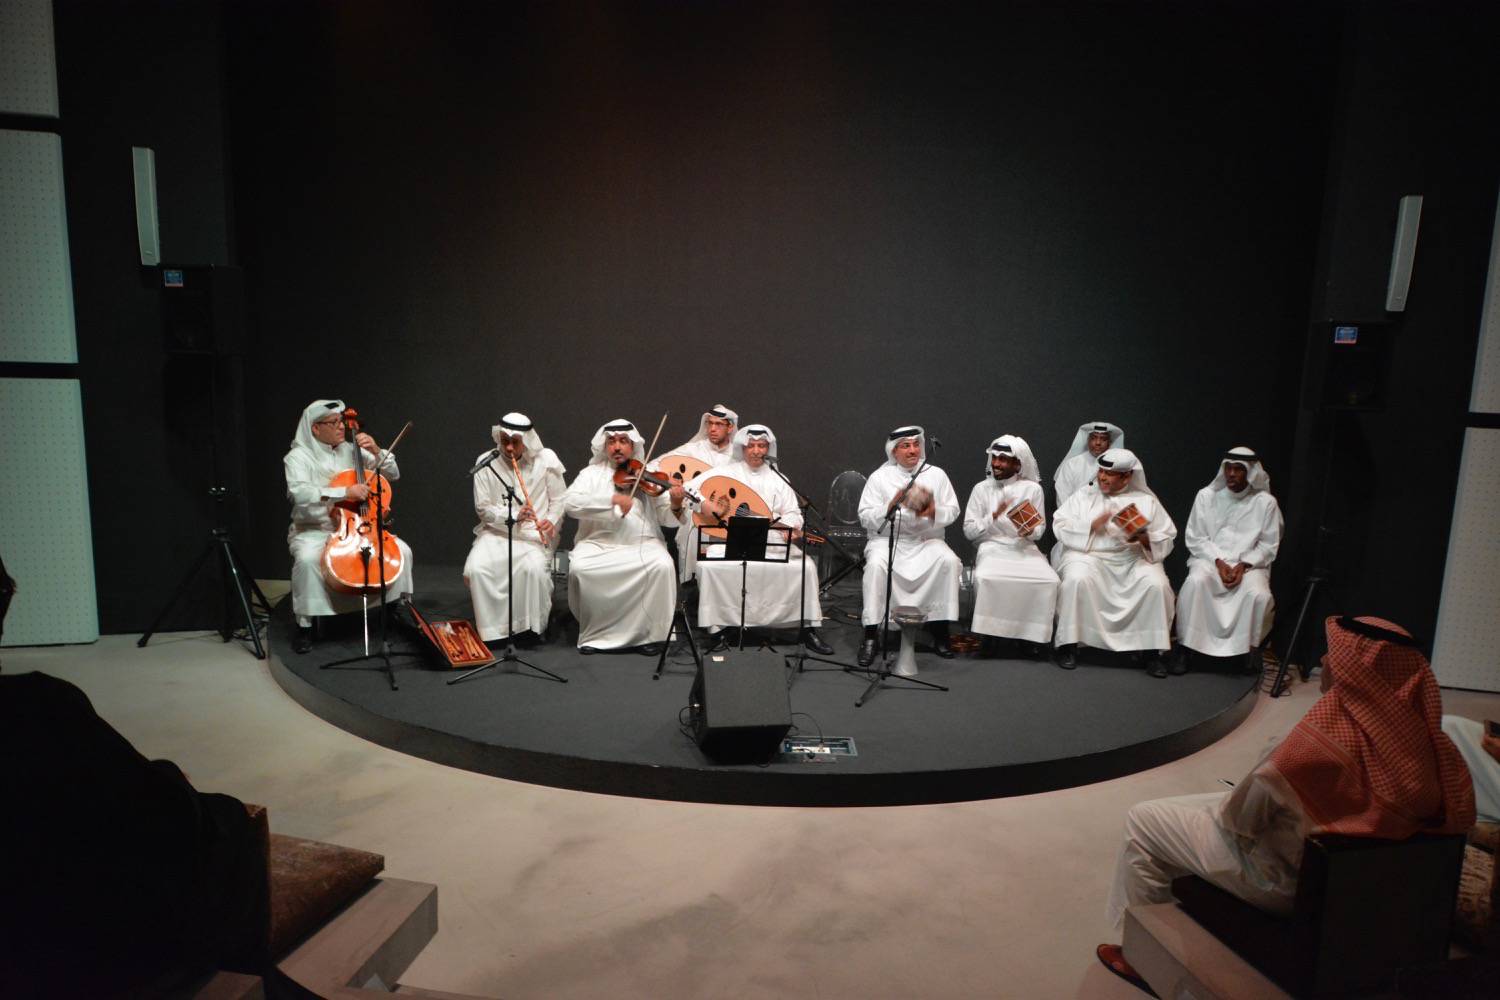 Interior view of the performance space in the Mohammed Bin Faris House, with a band performing on stage.